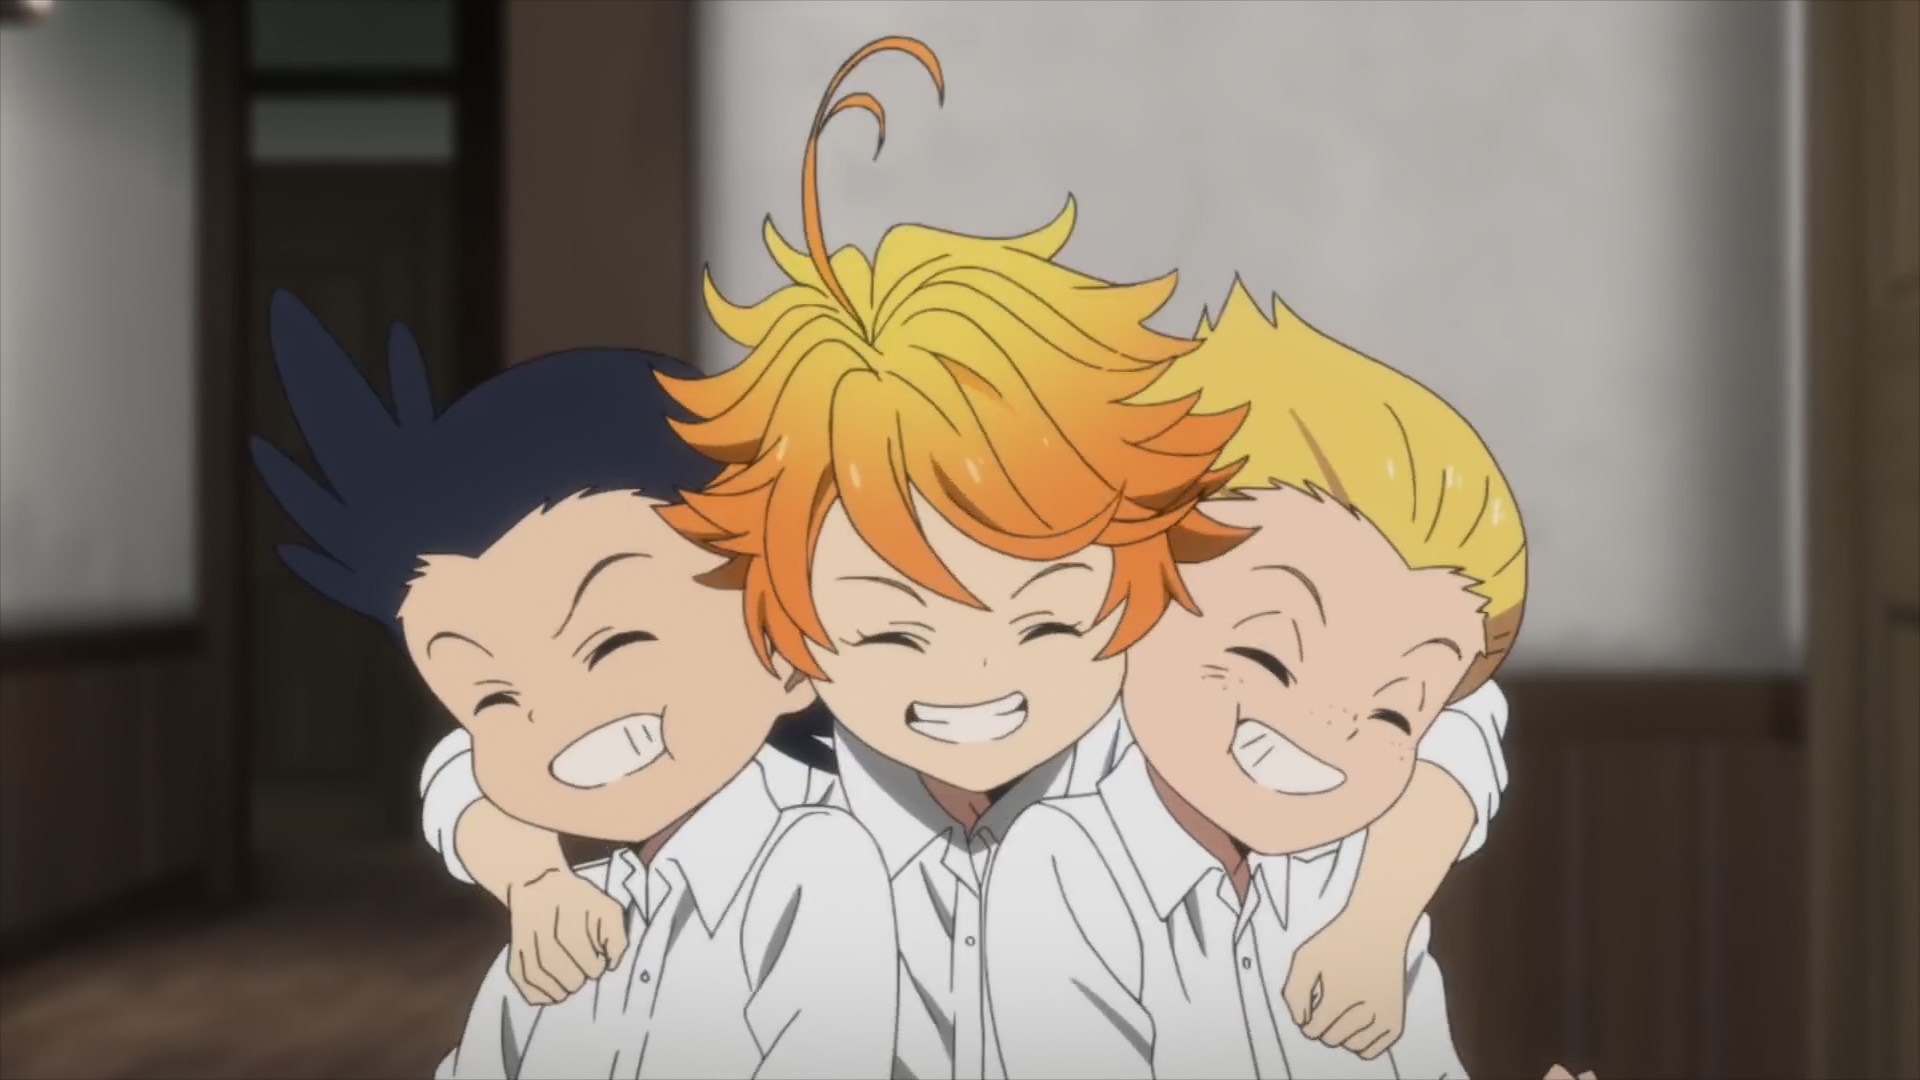 Manga/Anime Reccomendations on X: “The Promised Neverland” Are you looking  for an anime with countless adventures, plenty plot twists, numerous  thrillers, and smart main leads? That's TPN! A bit similar to AoT